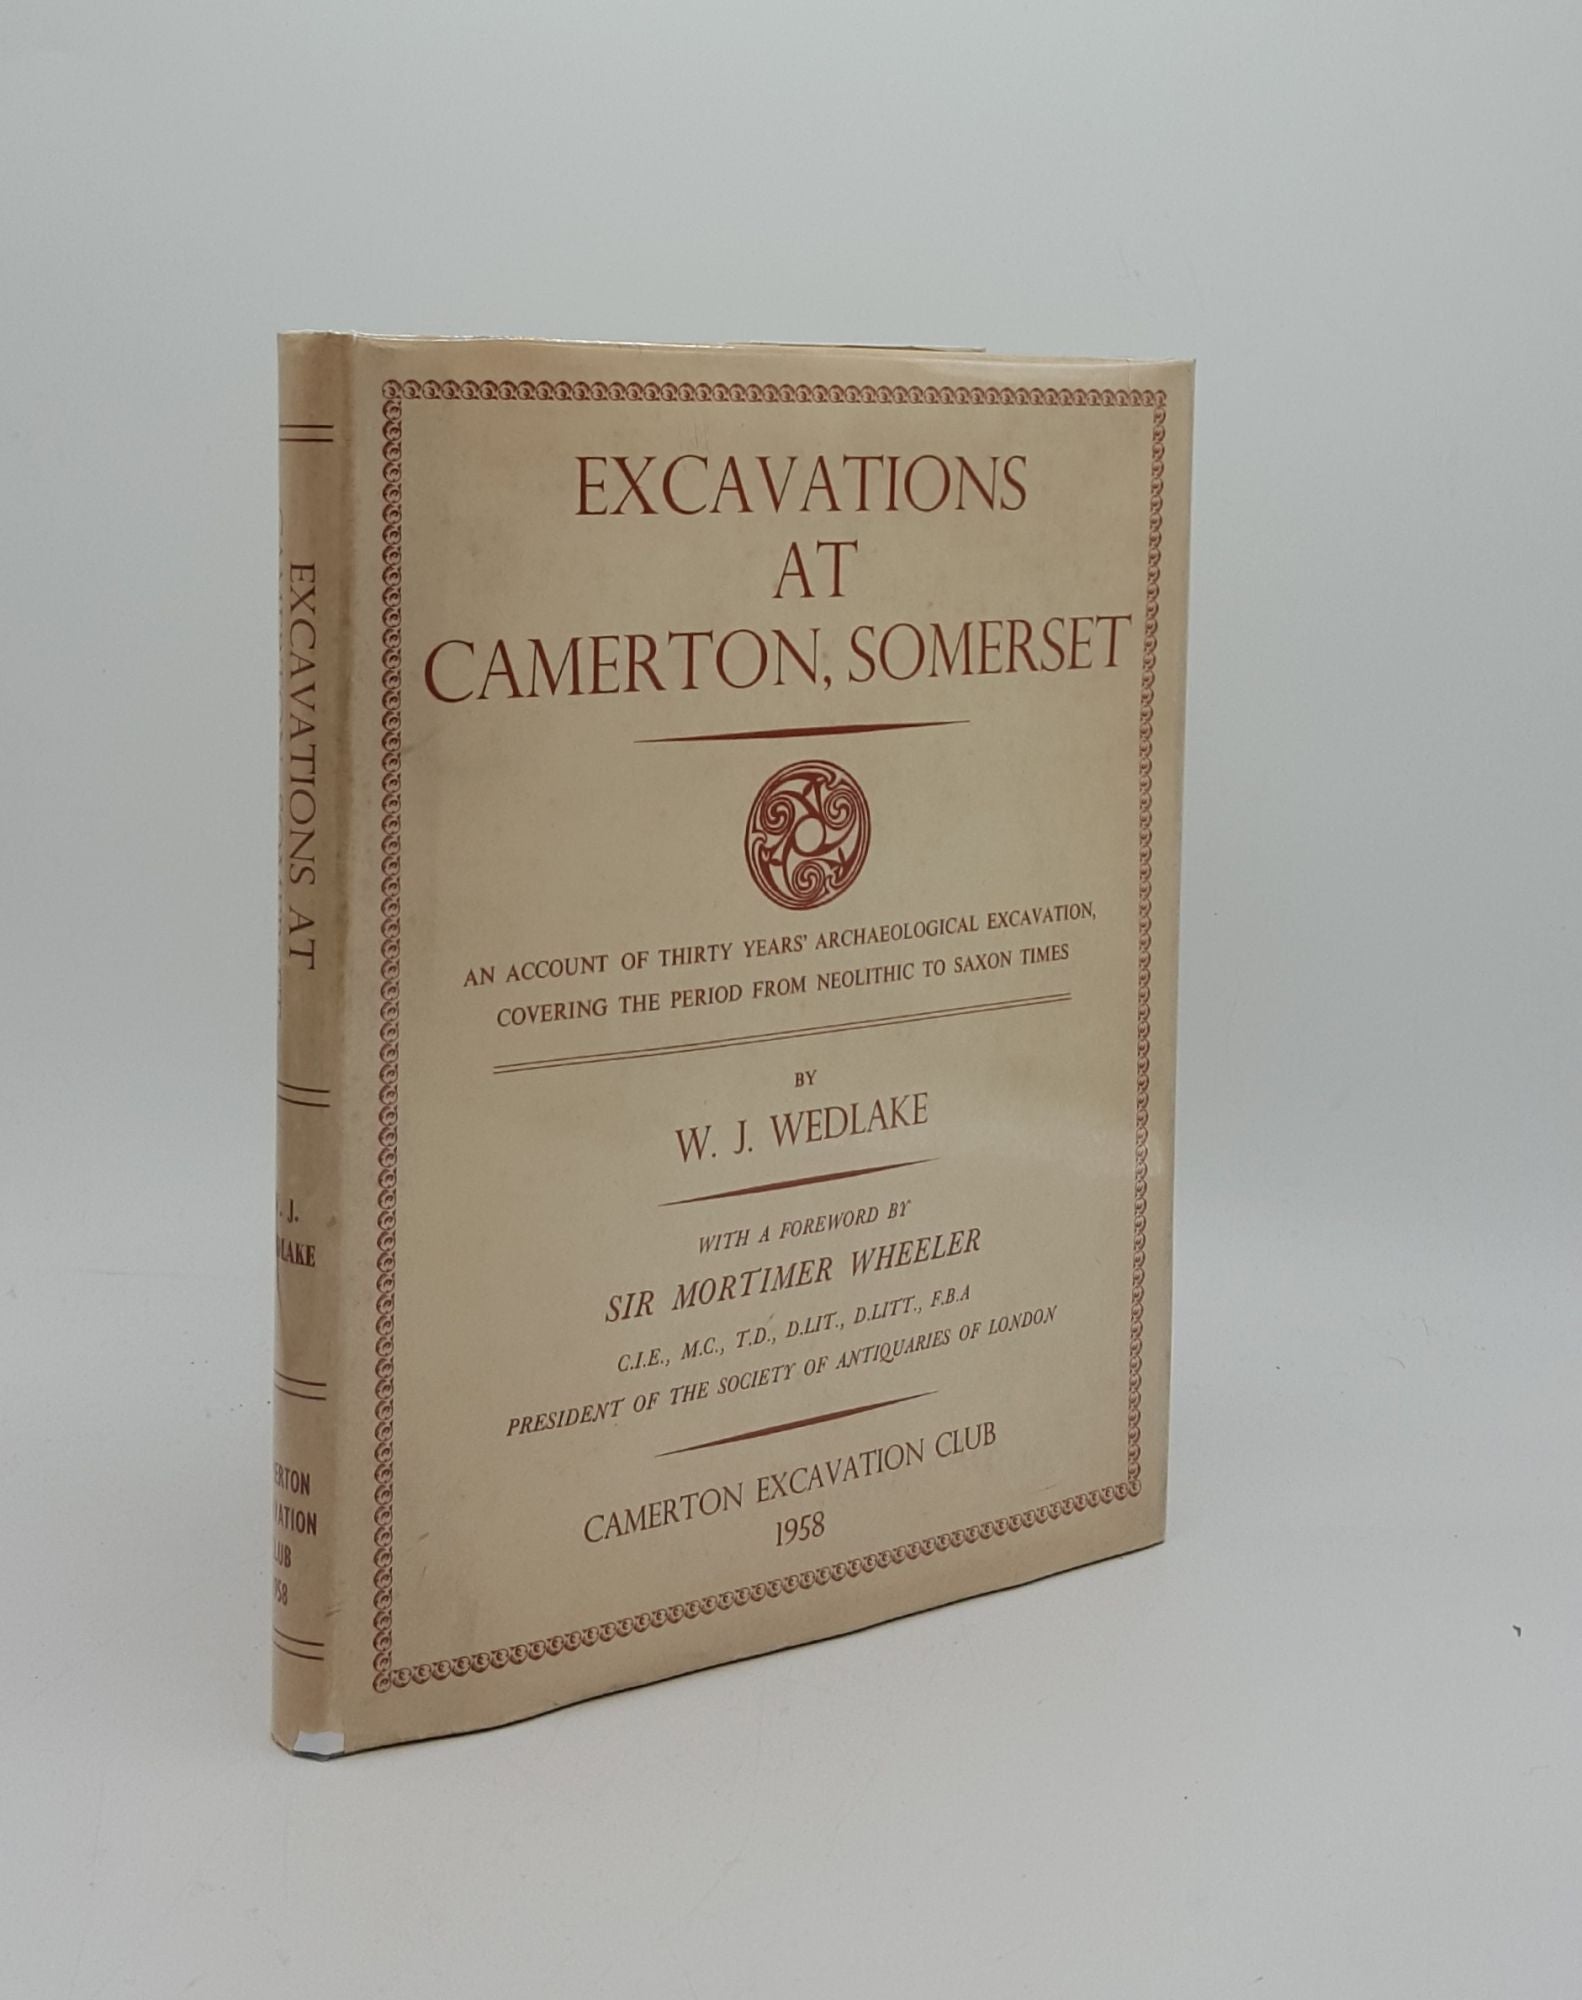 WEDLAKE W.J. - Excavations at Camerton Somerset a Record of Thirty Years' Excavation Covering the Period from Neolithic to Saxon Times 1926-56